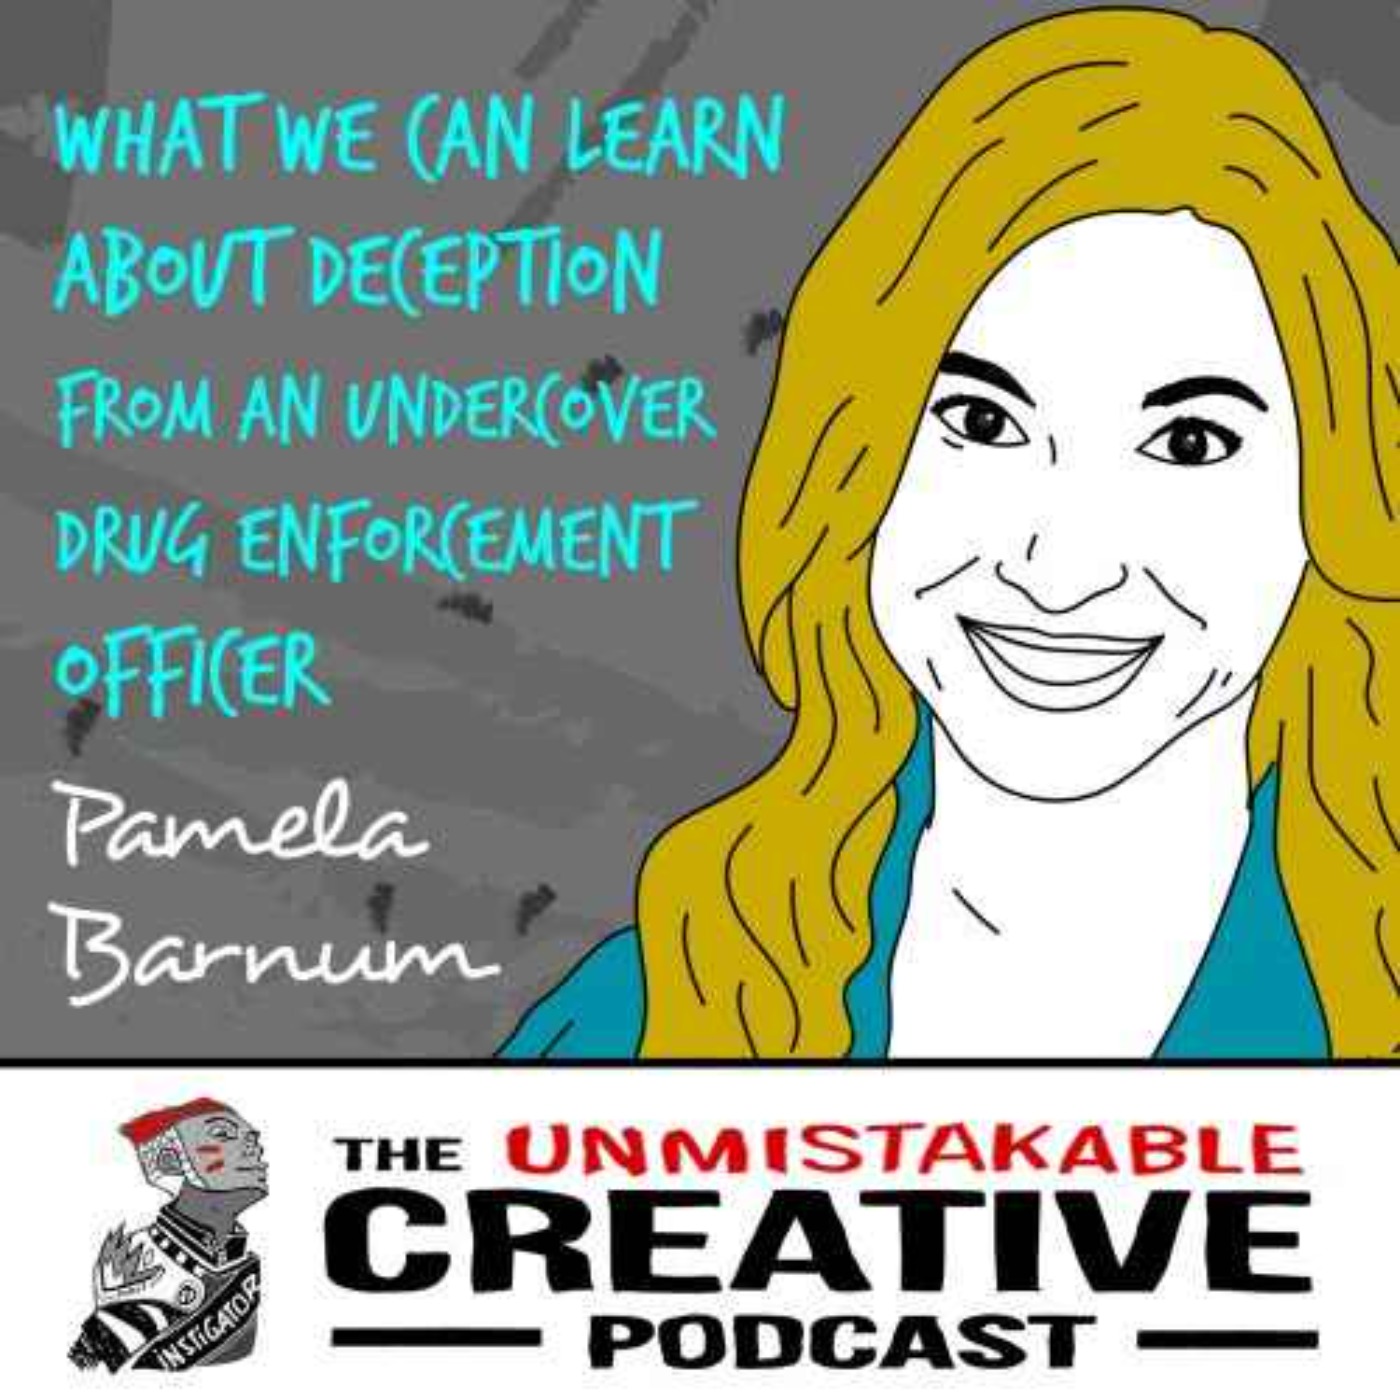 Listener Favorites: Pamela Barnum | What We Can Learn About Deception from an Undercover Drug Enforcement Officer Image